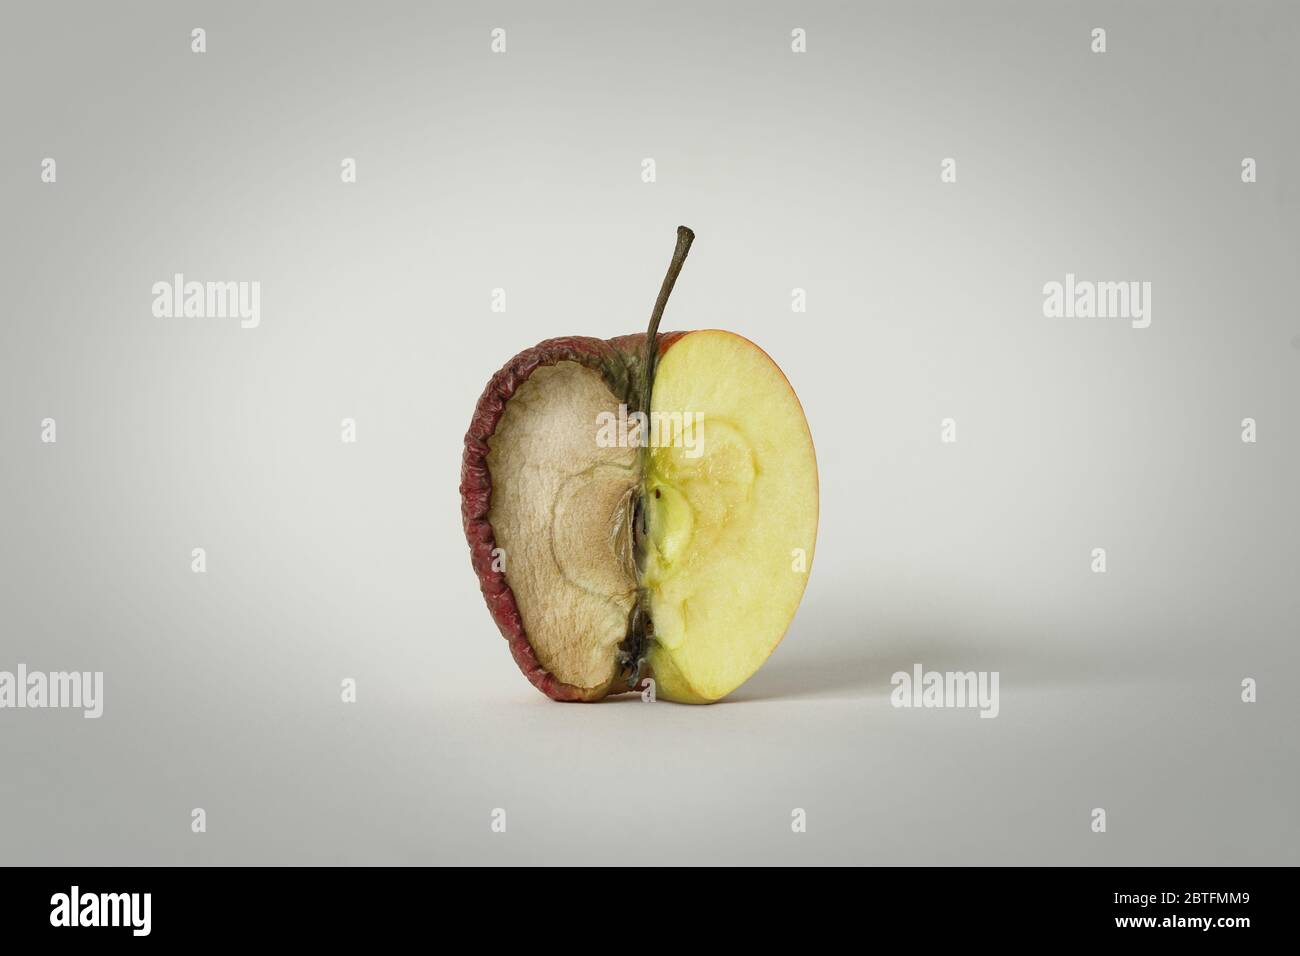 red apple with one half good and the other half rotten, concept of time, fruit that becomes garbage and that is thrown away, white background, isolate Stock Photo